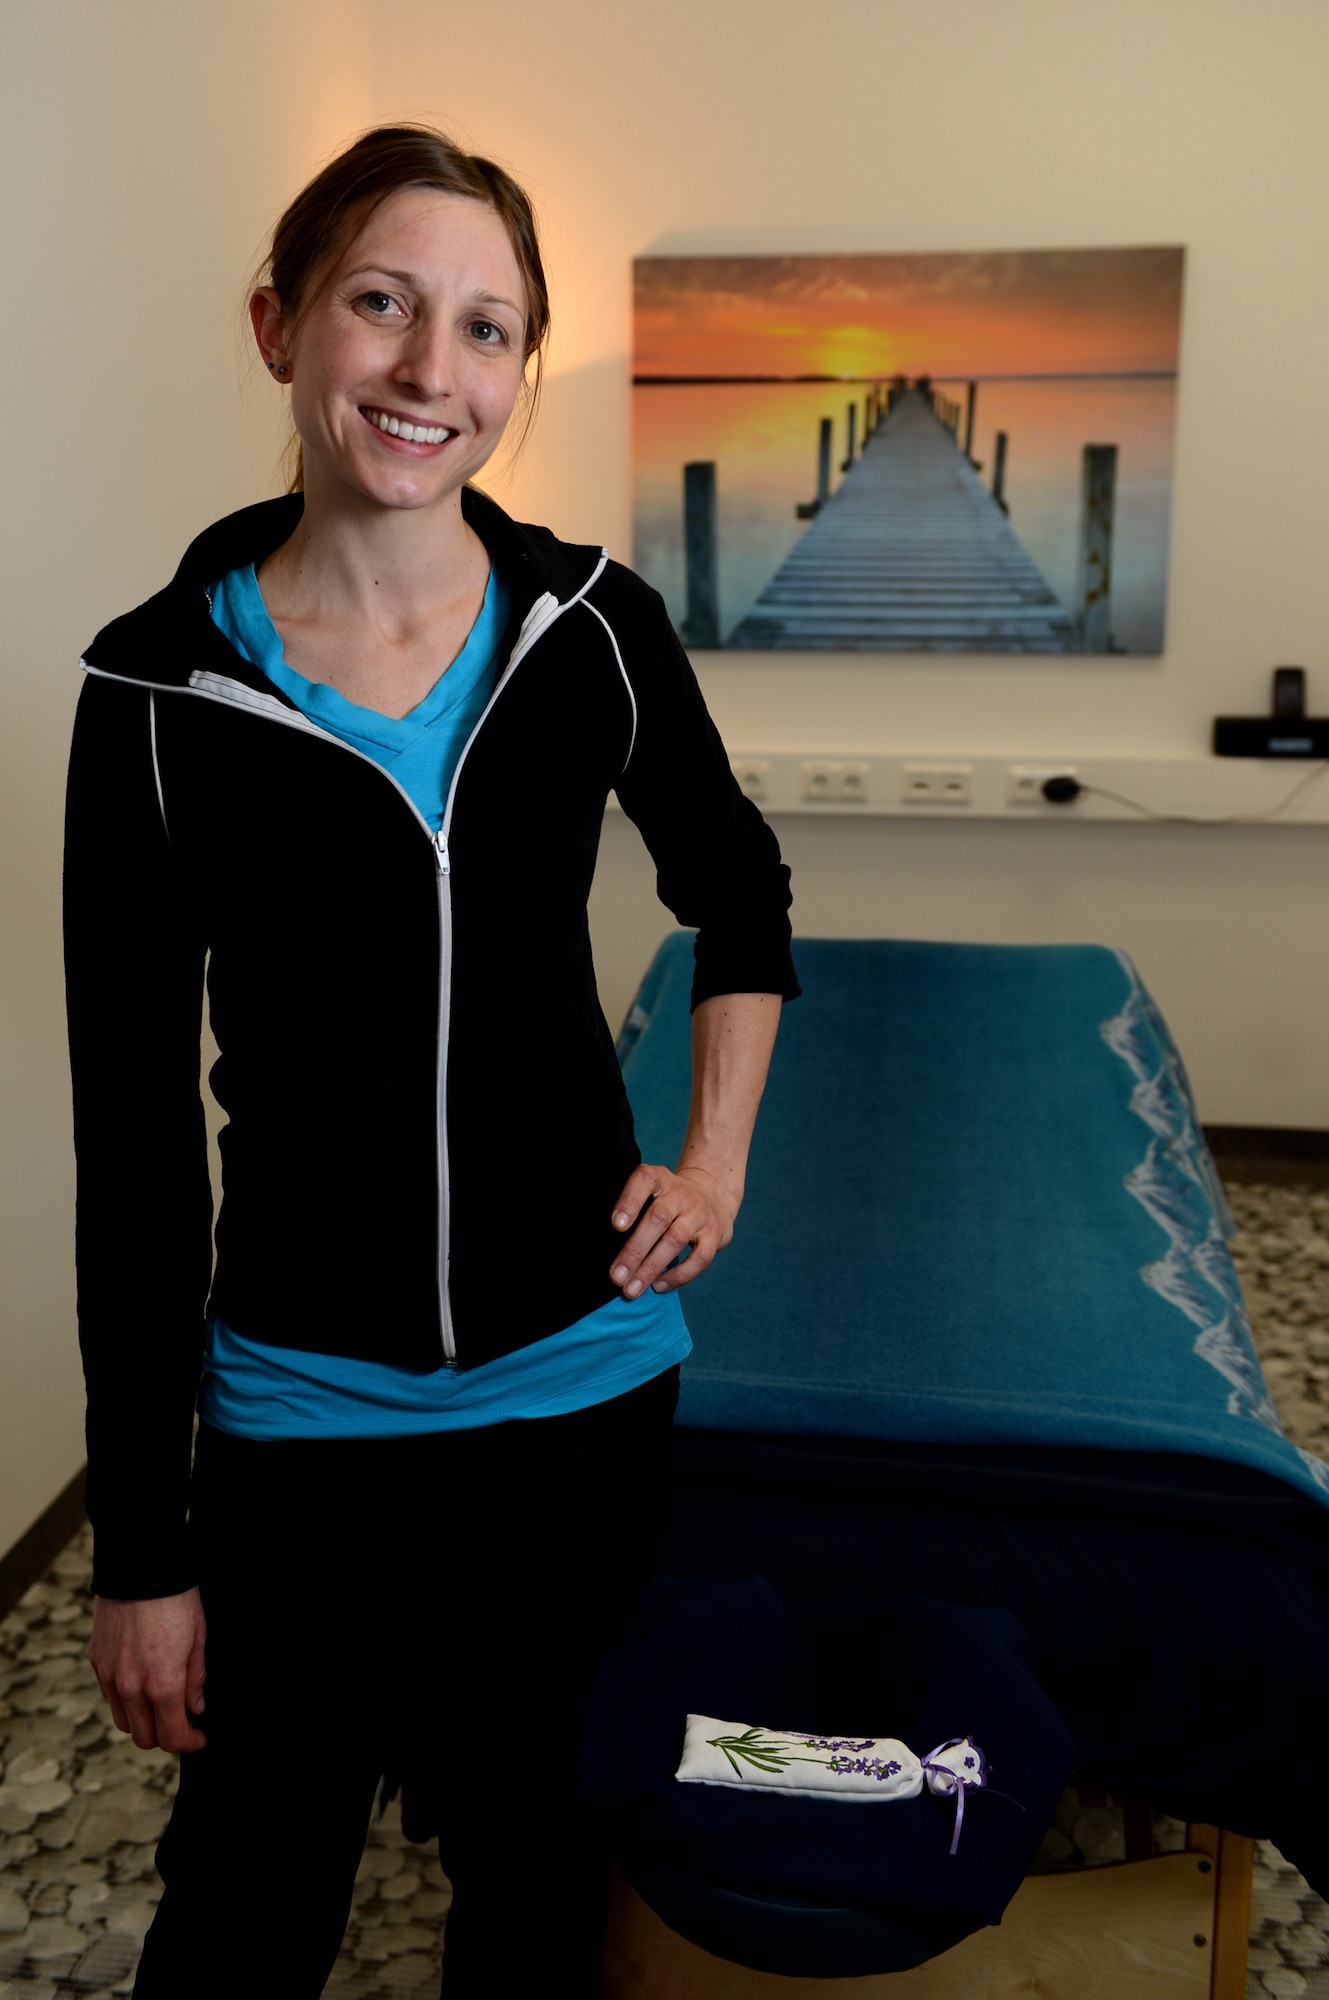 Andrea Trebesh, a massage therapist from Colorado Springs, Colo., stands in front of her massage table at Spangdahlem Air Base, Germany, March 14, 2014. Trebesh is a licensed therapist who applies her knowledge of sports and physical activity to help determine which muscles need attention. (U.S. Air Force photo by Airman 1st Class Kyle Gese/Released)